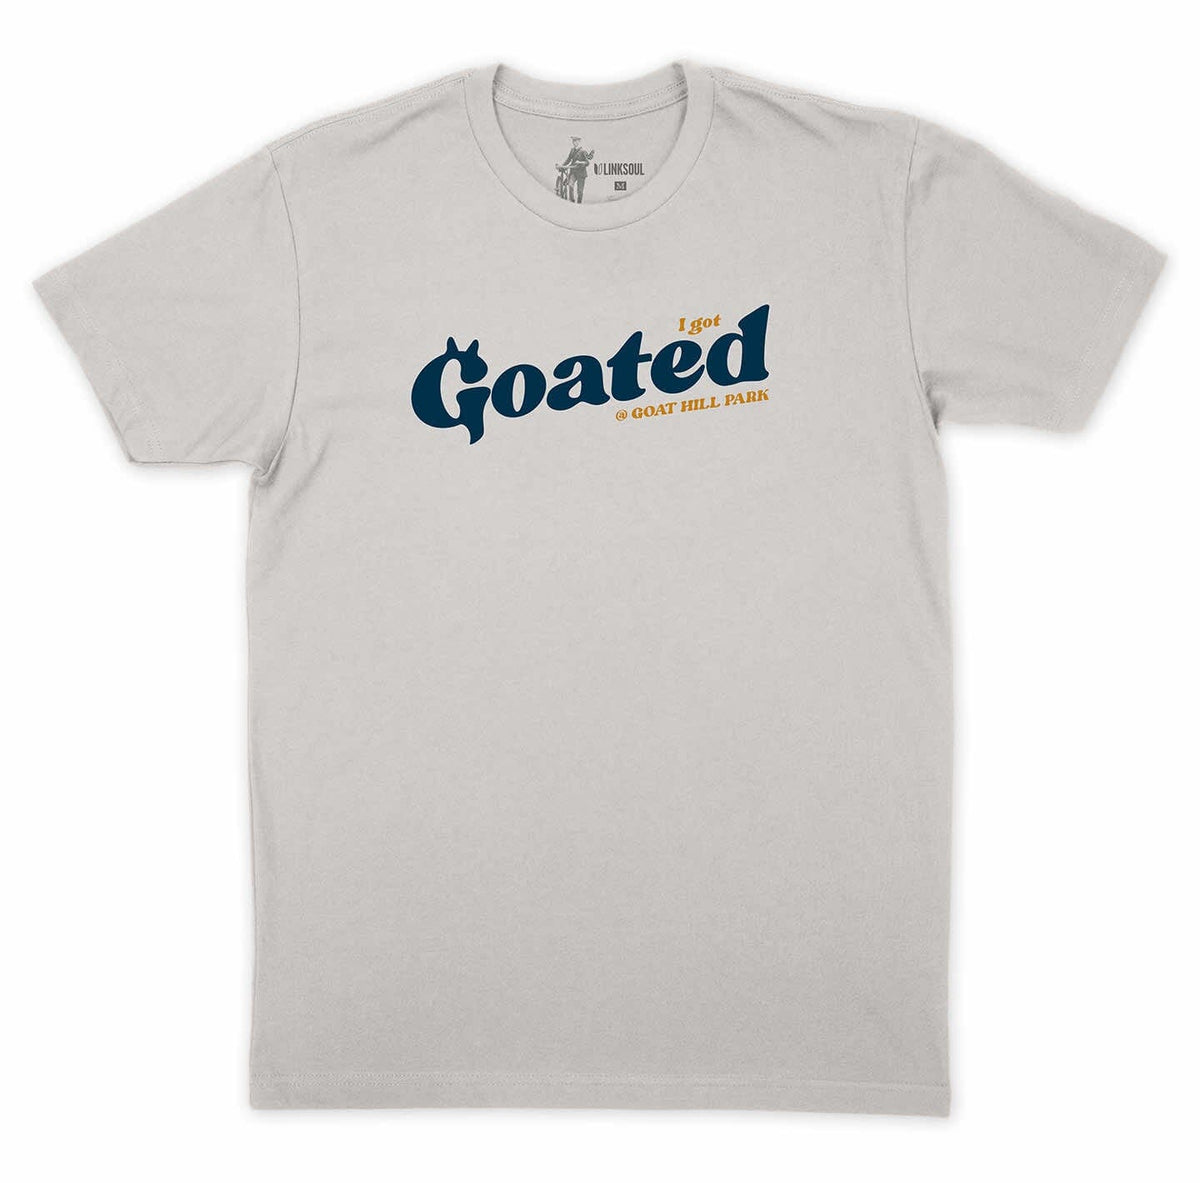 The Goated Lite Tee